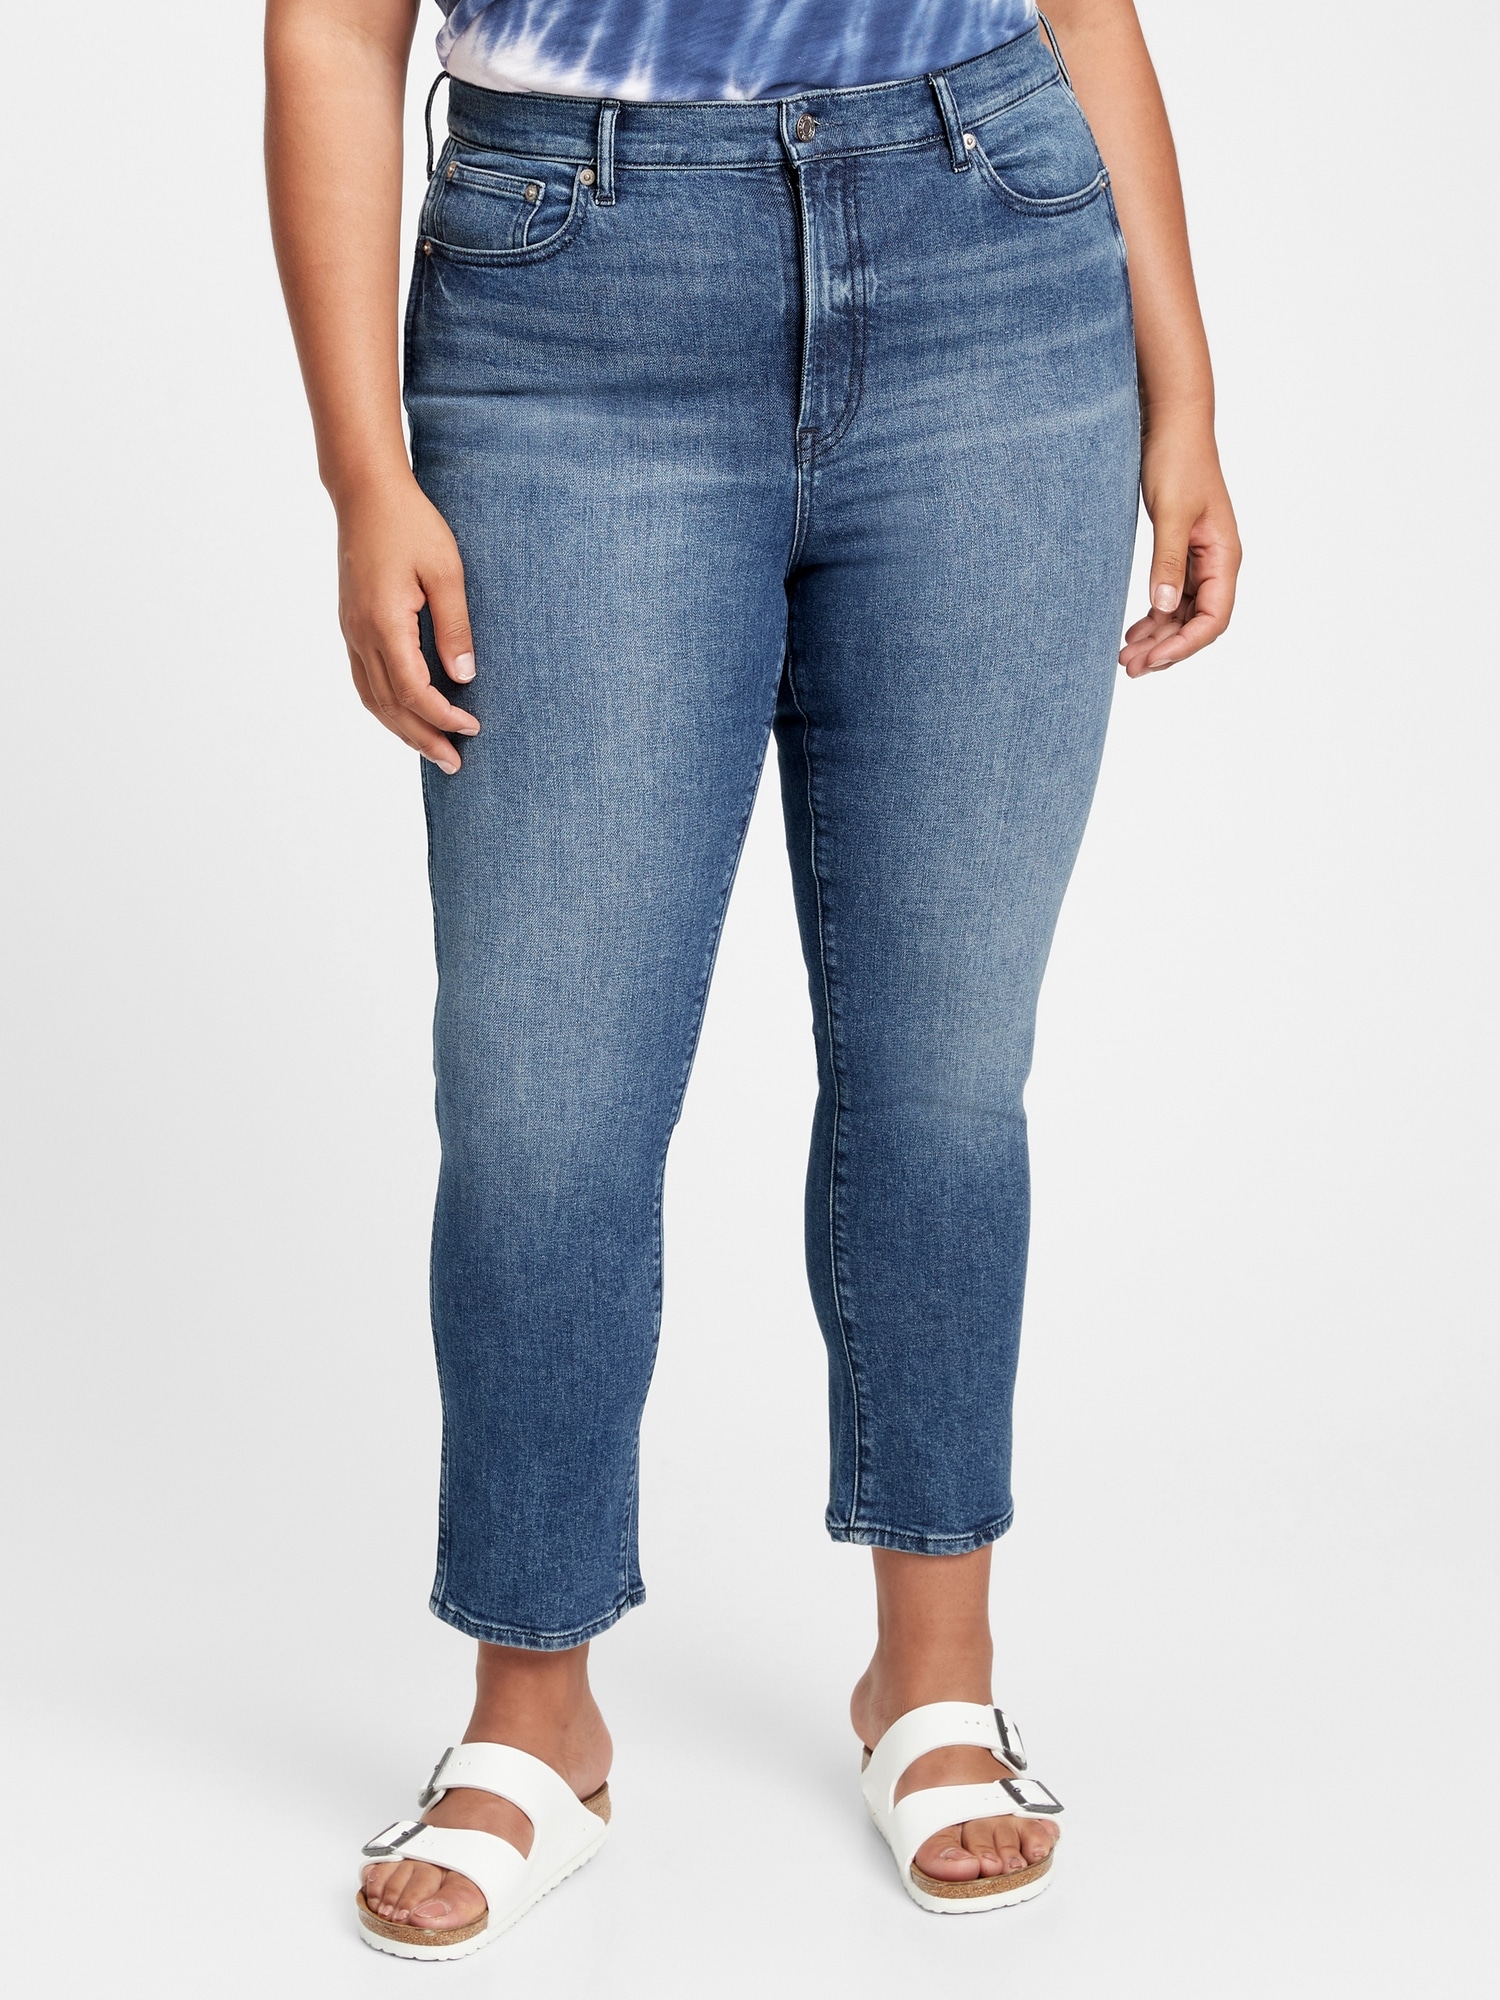 High Rise Vintage Slim Jeans with Washwell | Gap Factory